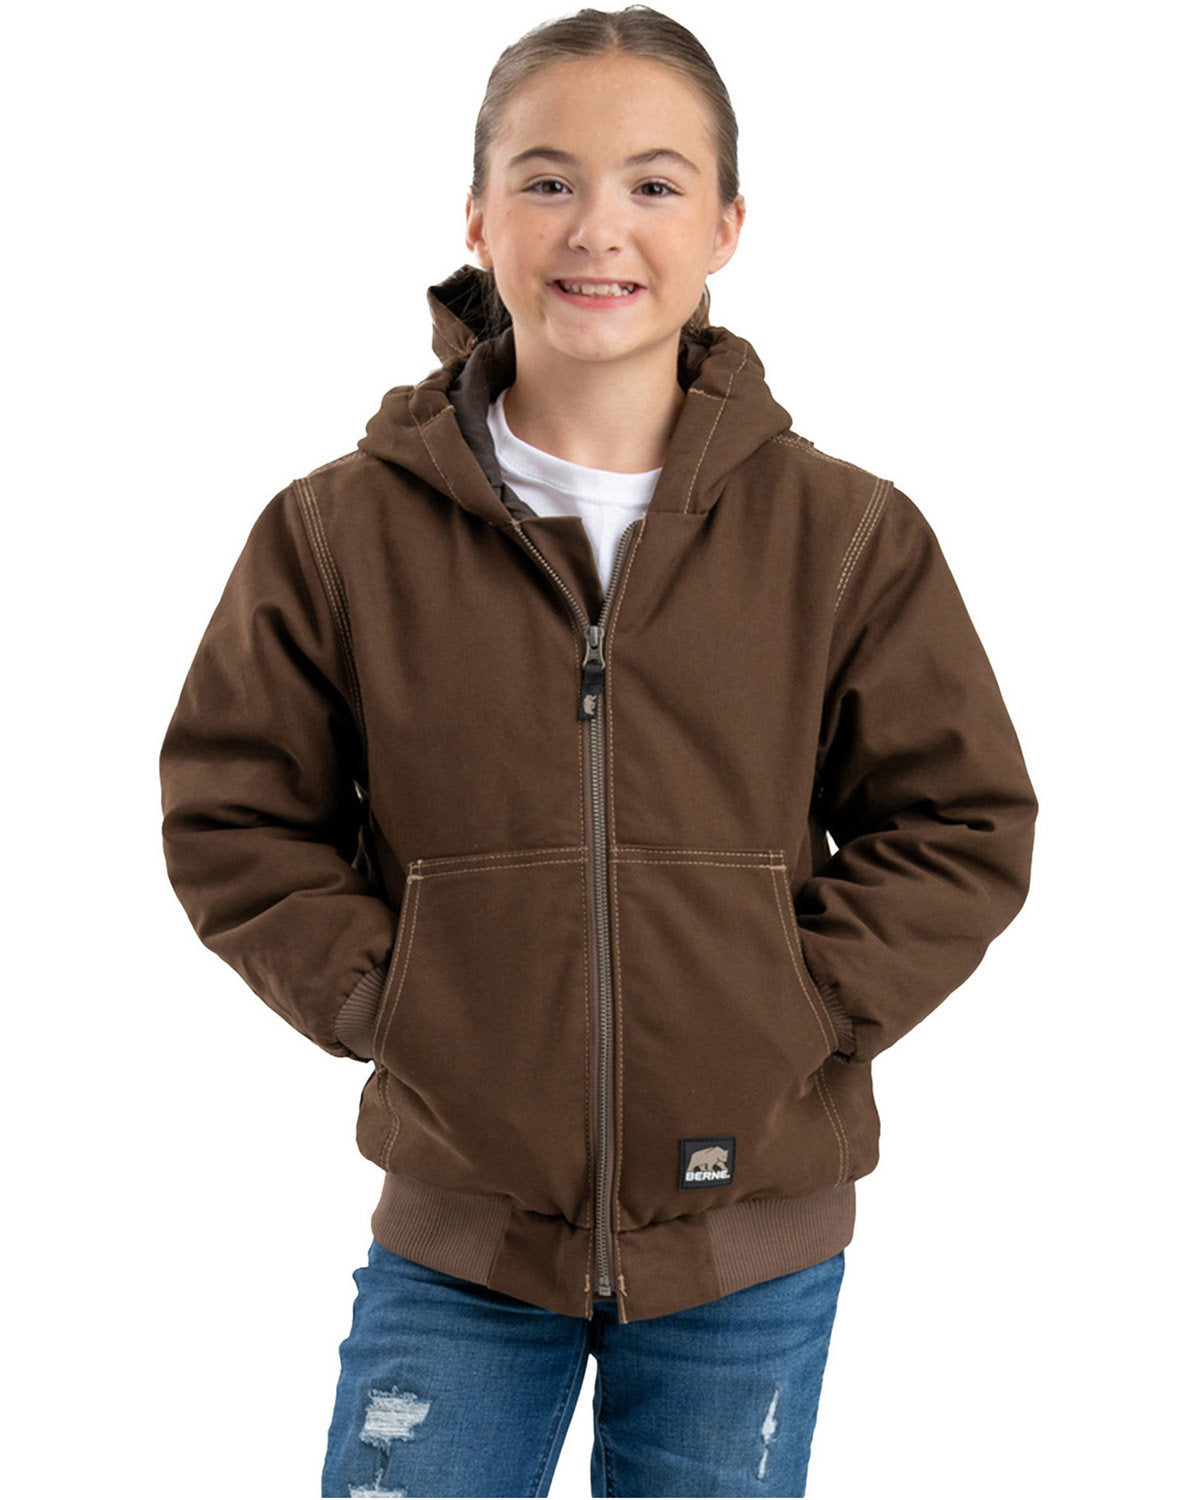 Youth Softstone Duck Hoodie Jacket